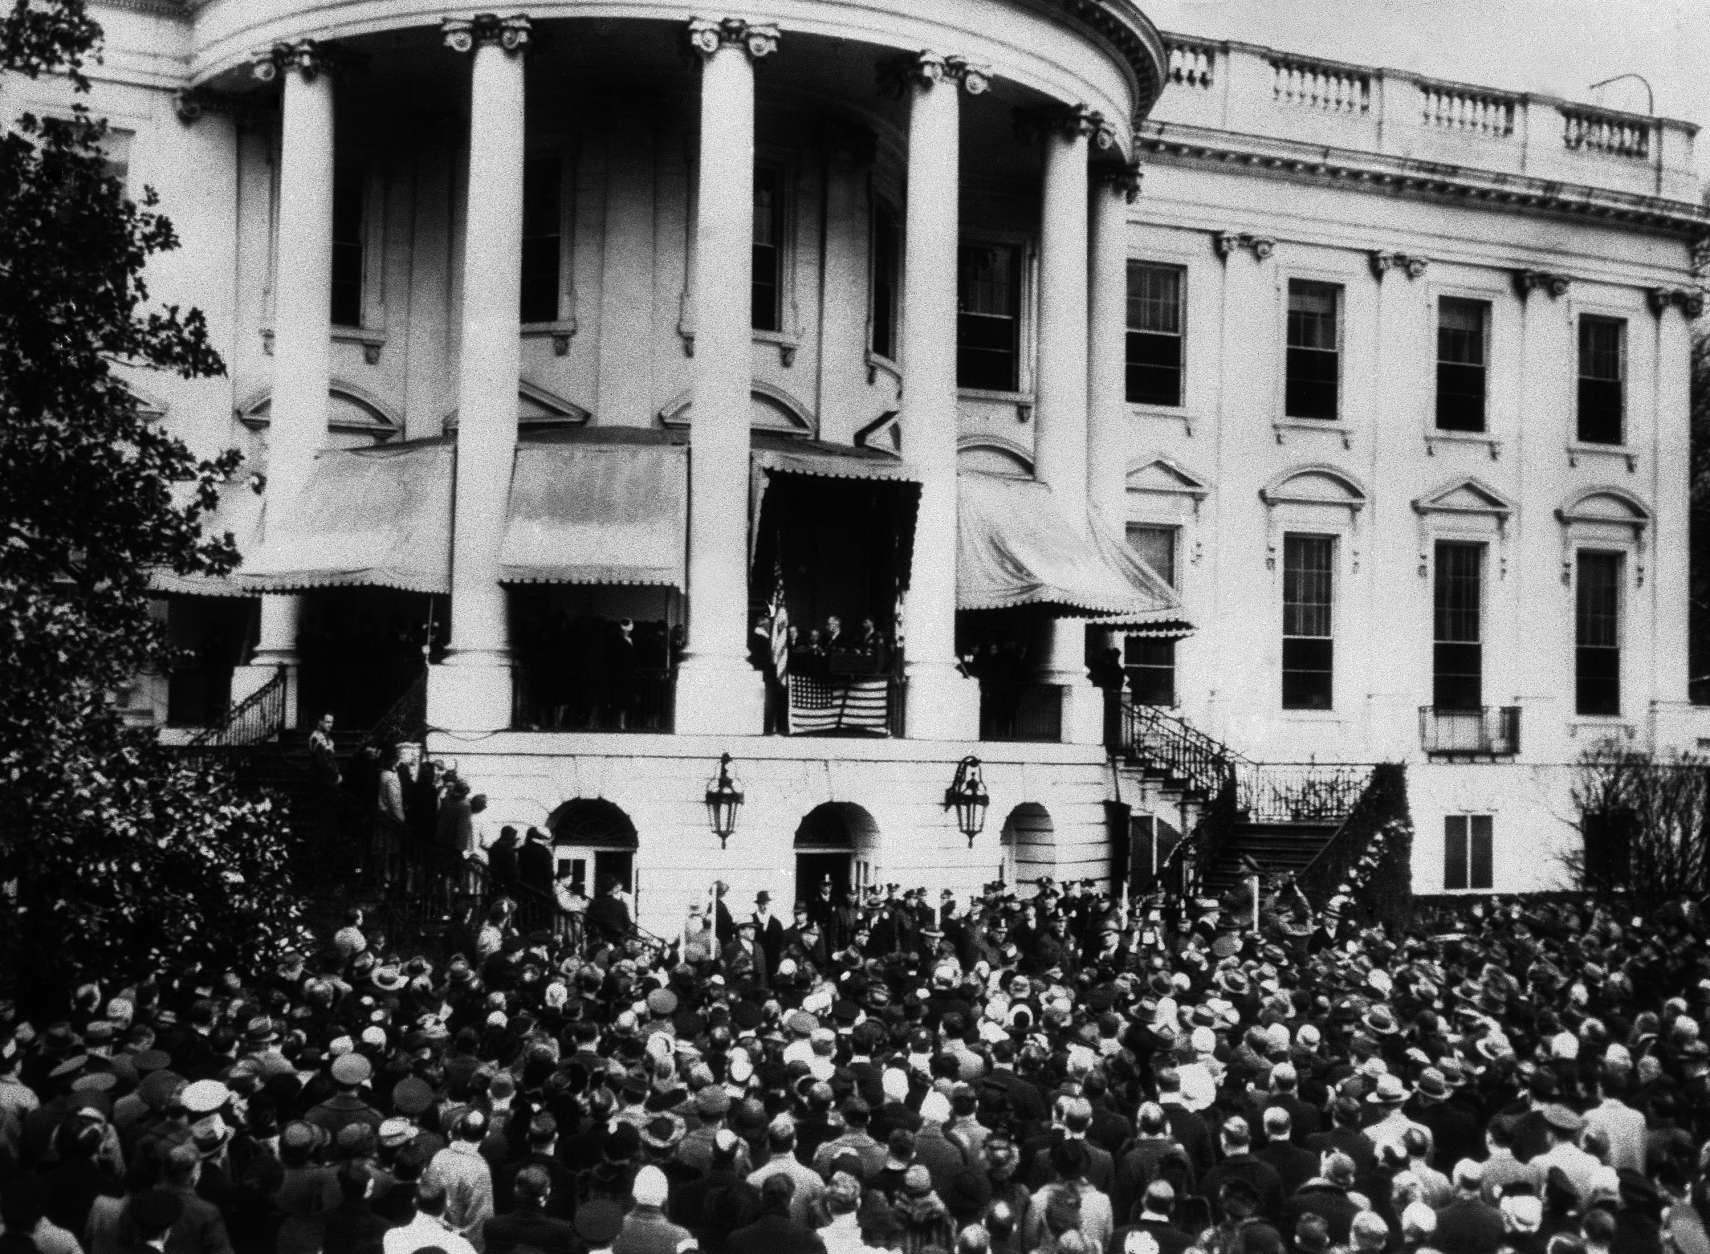 Over 7,000 people stood in the snow-covered grounds at the back of the White House to watch President Roosevelt inaugurated in Washington, on Jan. 20, 1945, for his fourth term. Wartime Austerity was the keynote of the proceedings and the whole ceremony was completed in under 15 minutes. President Roosevelt takes the oath, as diplomats, members of Congress and distinguished guests look on in foreground. On the porch are cabinet members, Supreme Court justices and their wives. Prominent in centre of porch are, left to right: Edwin Halsey, Secretary of Senate, two unidentified secret servicemen; President Roosevelt, and his son, Colonel James Roosevelt. (AP Photo)